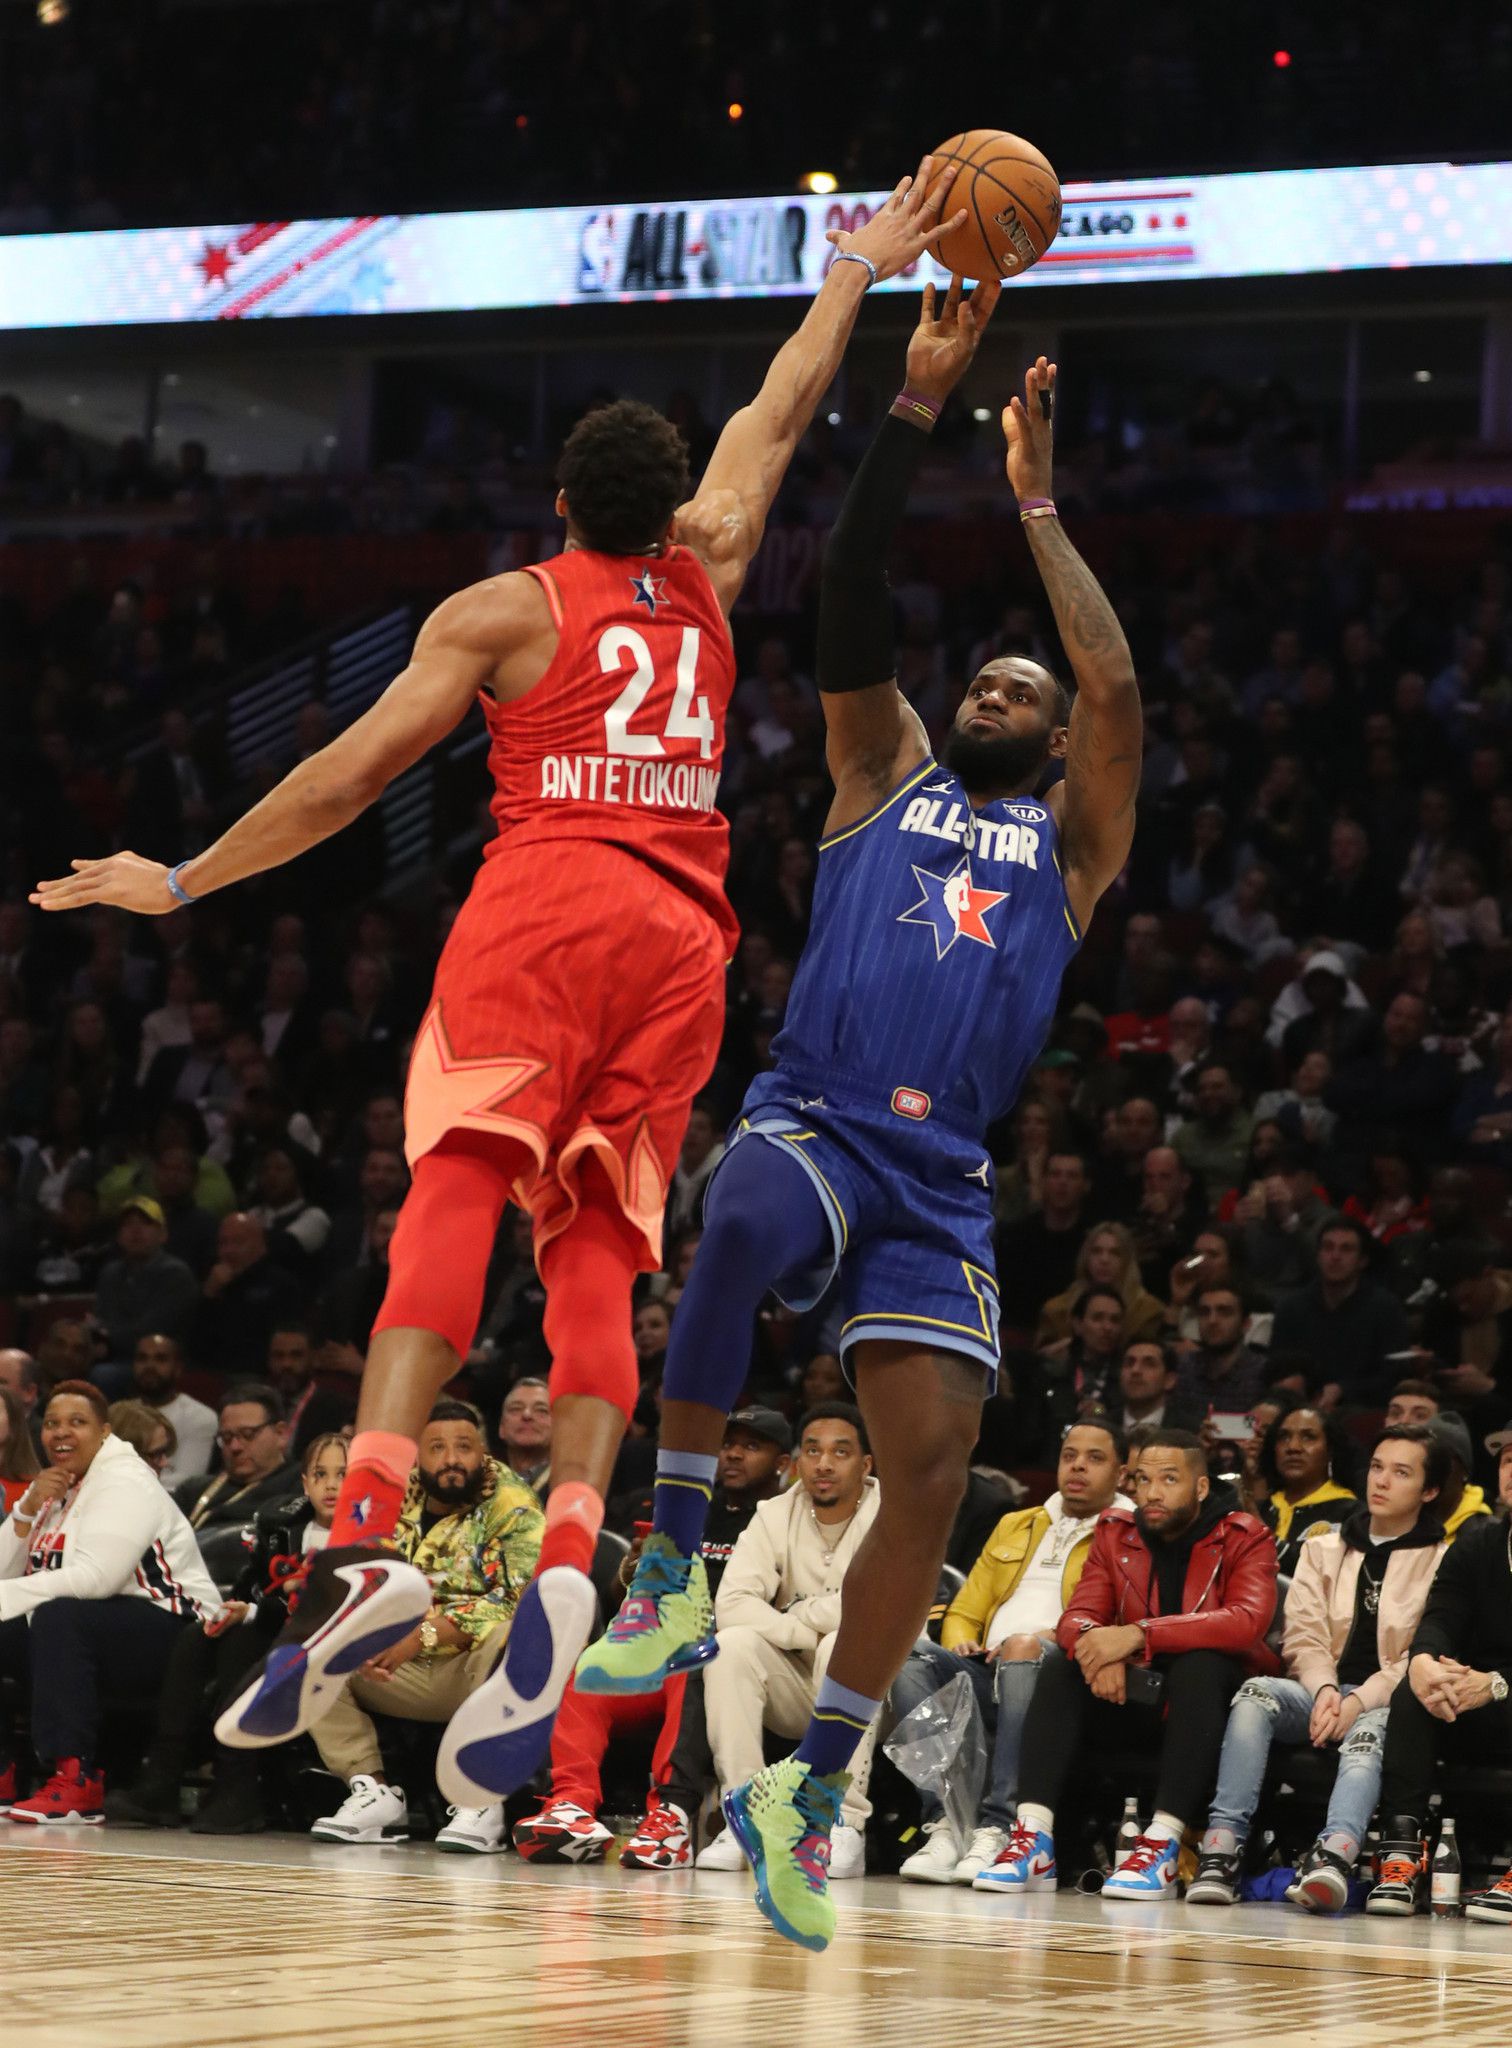 Giannis Antetokounmpo of Team Giannis blocks a shot attempt from LeBron  James of Team LeBron in the fourth quarter of the NBA All-Star Game on  Sunday, Feb. 16, 2020 at the United